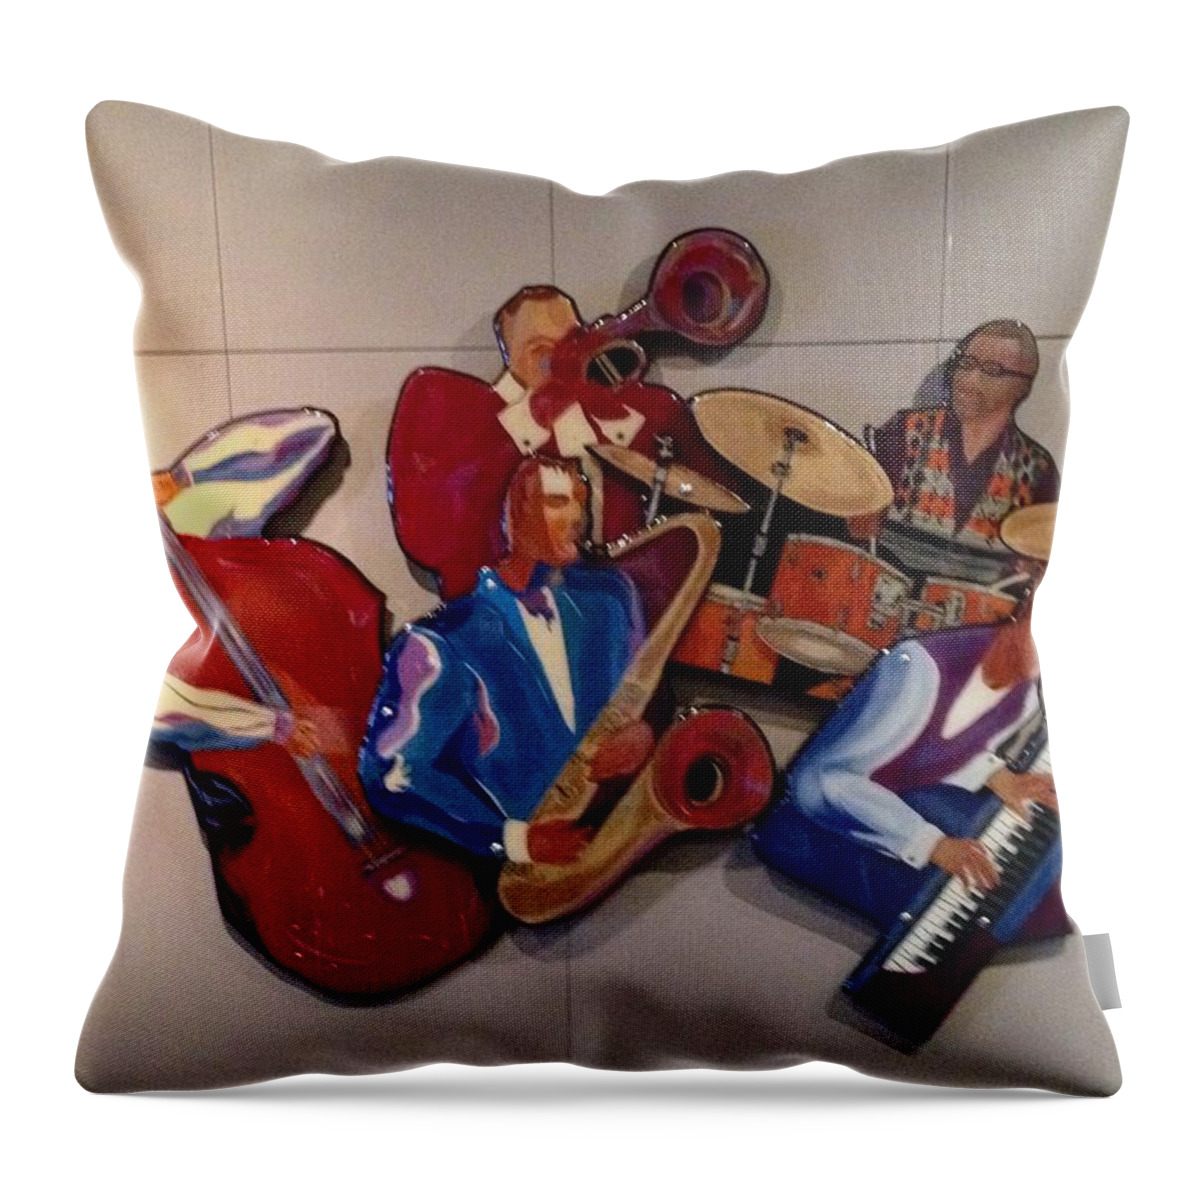 Jazz Throw Pillow featuring the painting Jazz Ensemble V-custom by Bill Manson